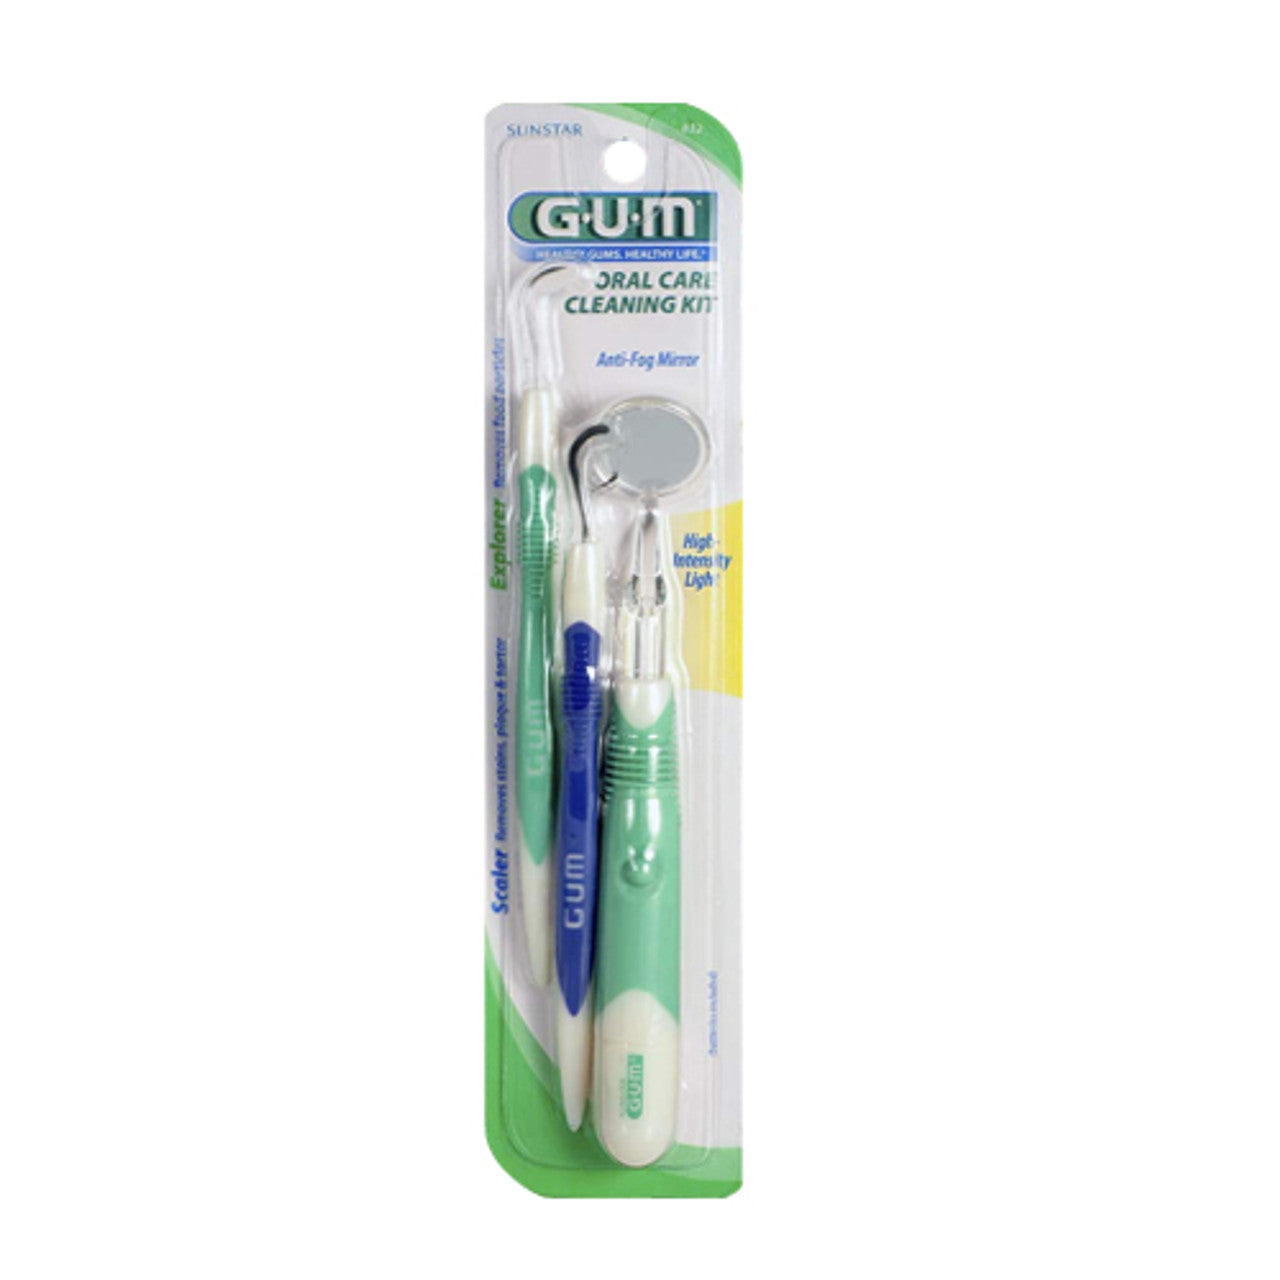 Gum Oral Care Cleaning Kit With Anti Fog Mirror - 1 Ea, 6 Pack